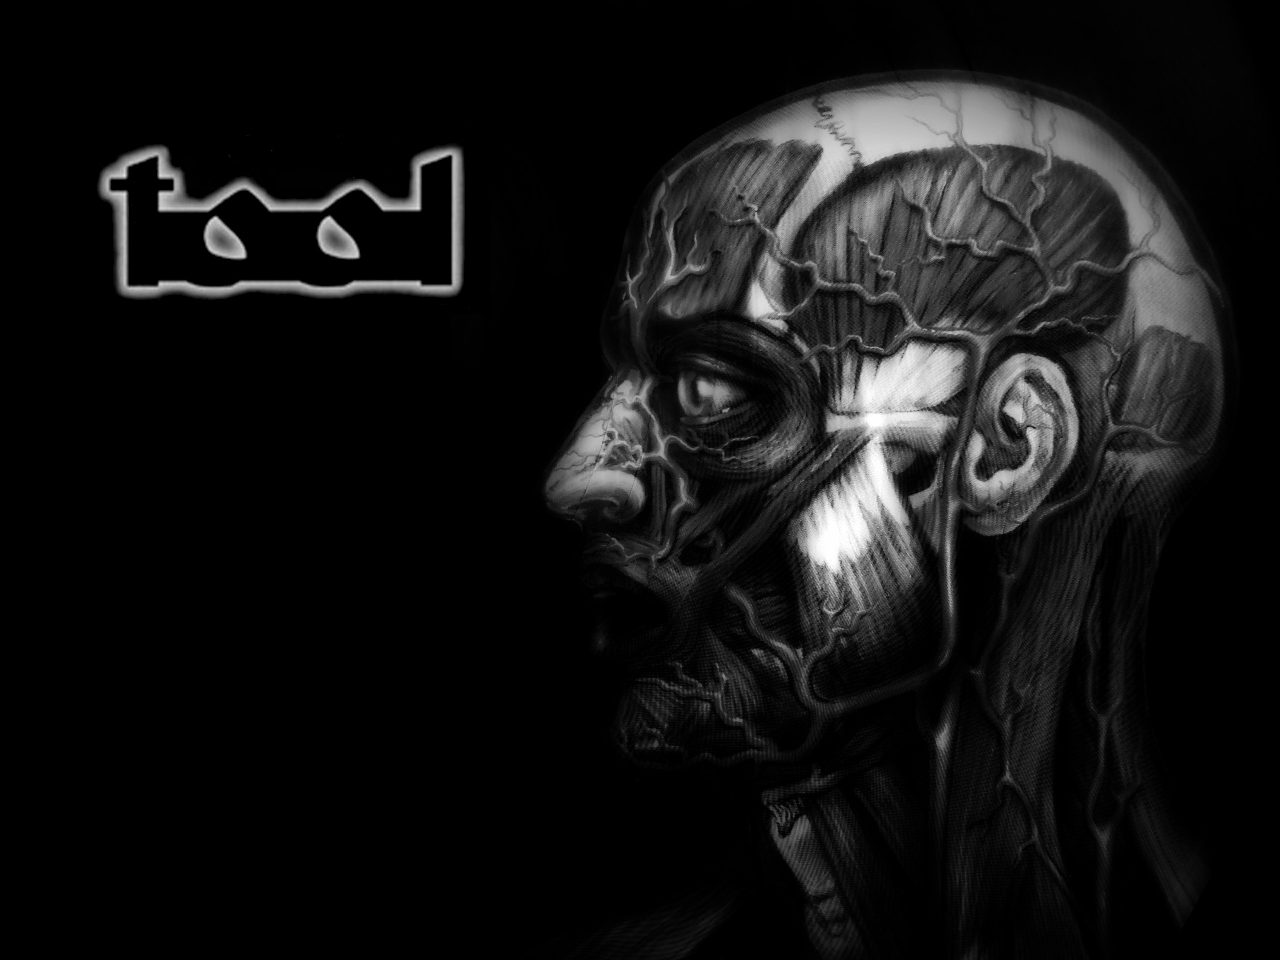 TOOL releasing double album “Decem” this fall and it’s over 2.5 hours long! #3